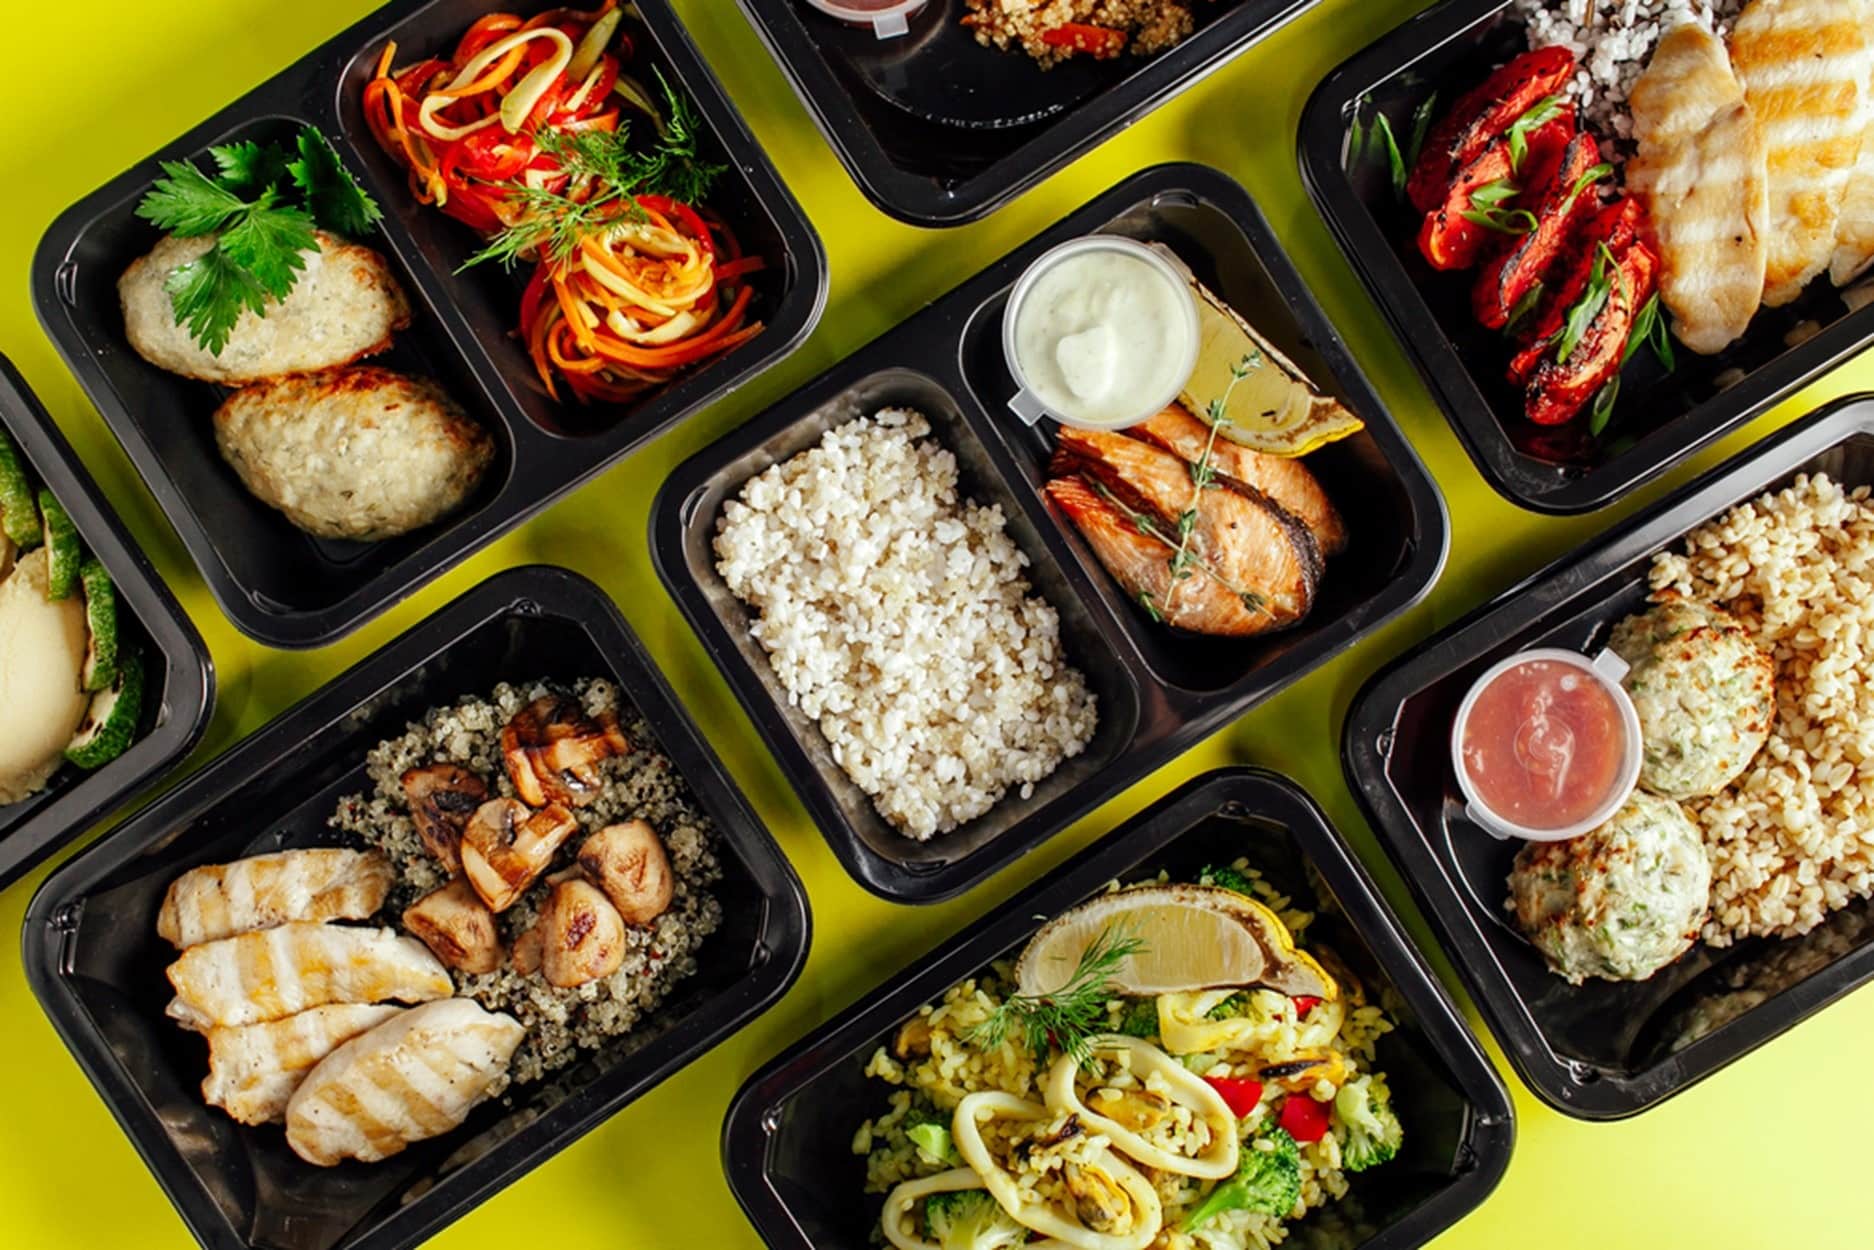 Check out this list of the 5 meal delivery services in West Palm Beach to pick your favorite one. All of them are loved for diverse menus and fast delivery.